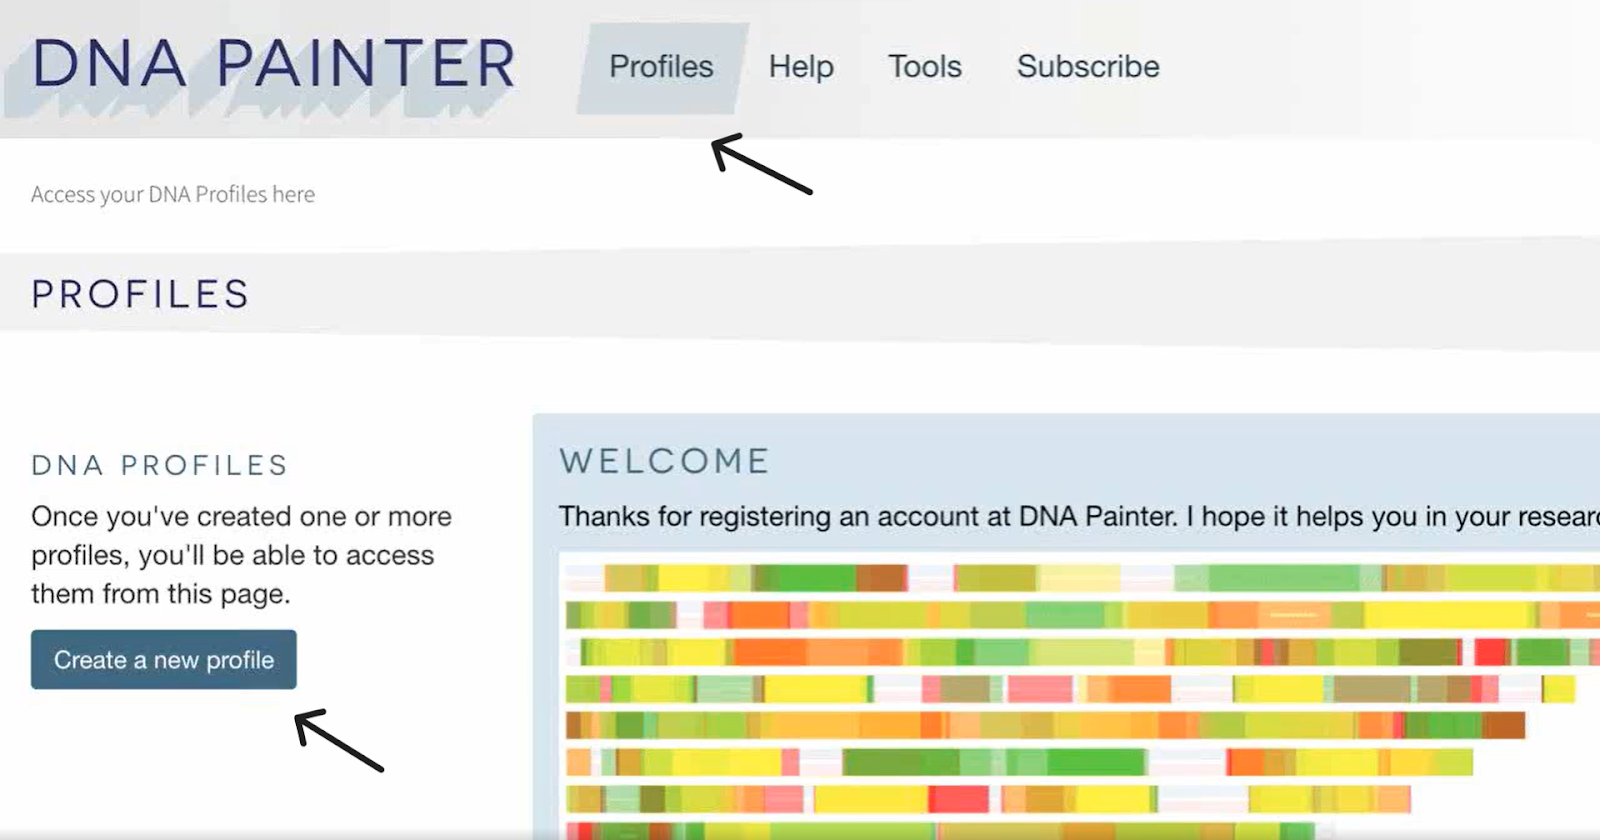 A screenshot from the DNA painter website, indicating how to create a new profile